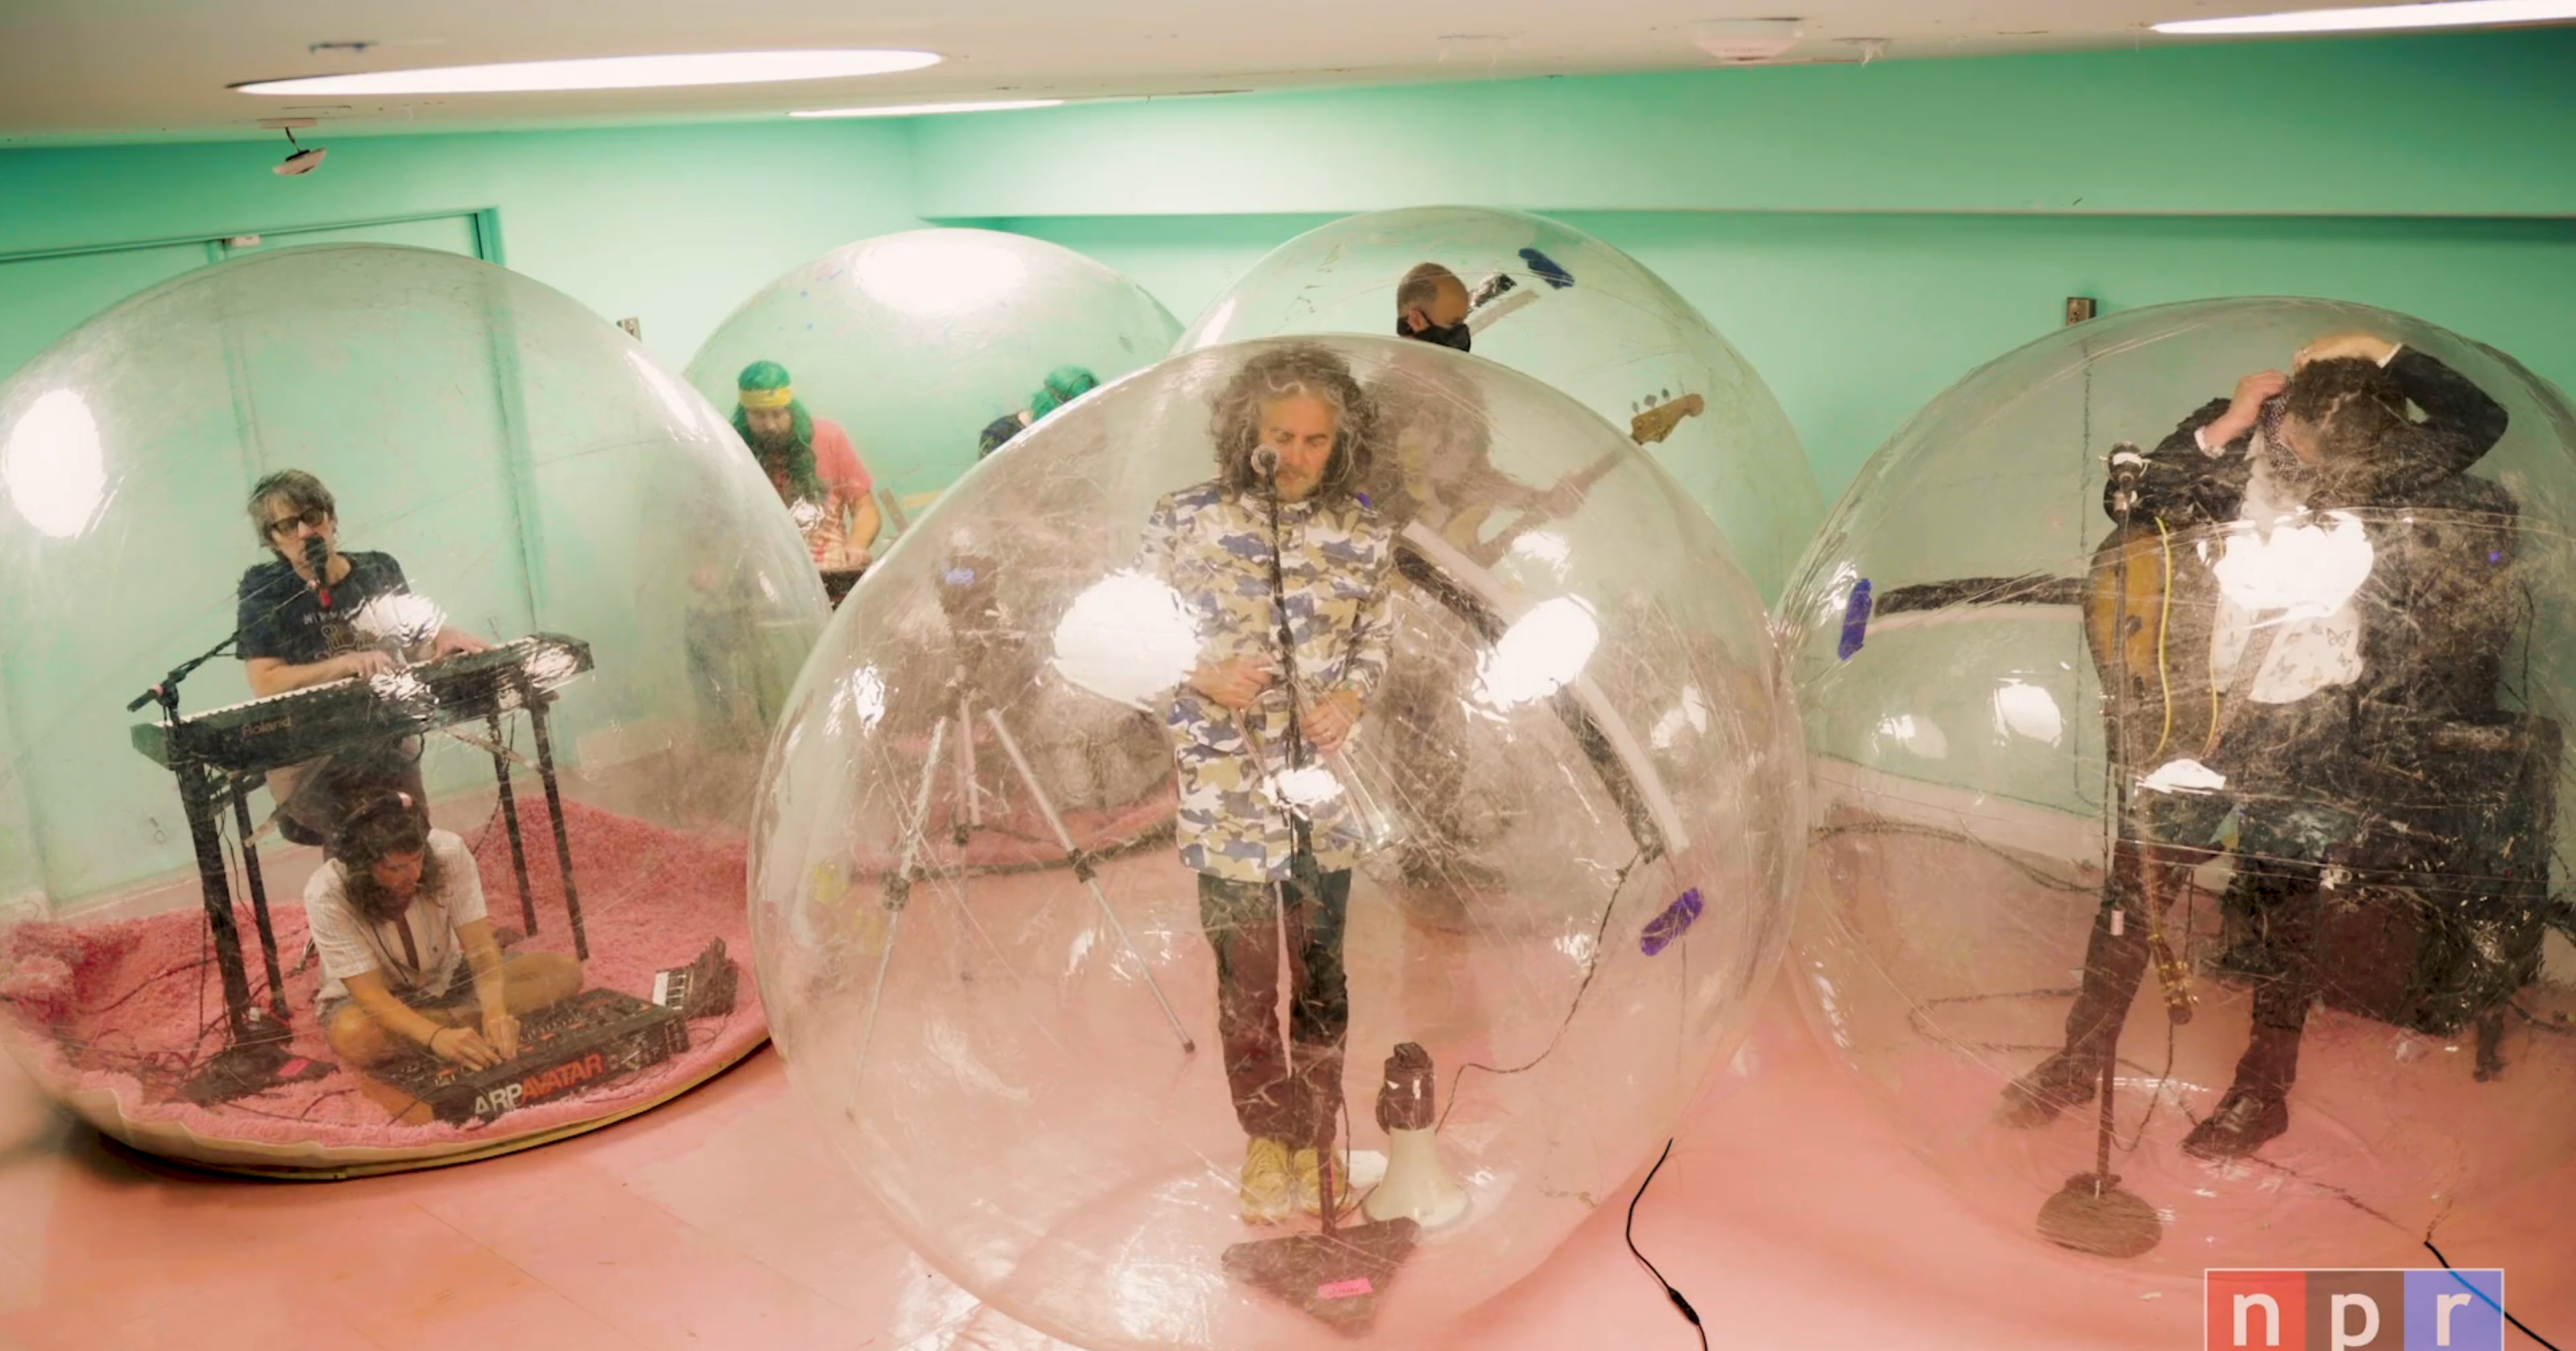 Flaming Lips Play 'Tiny Desk' Show Inside Their Bubbles